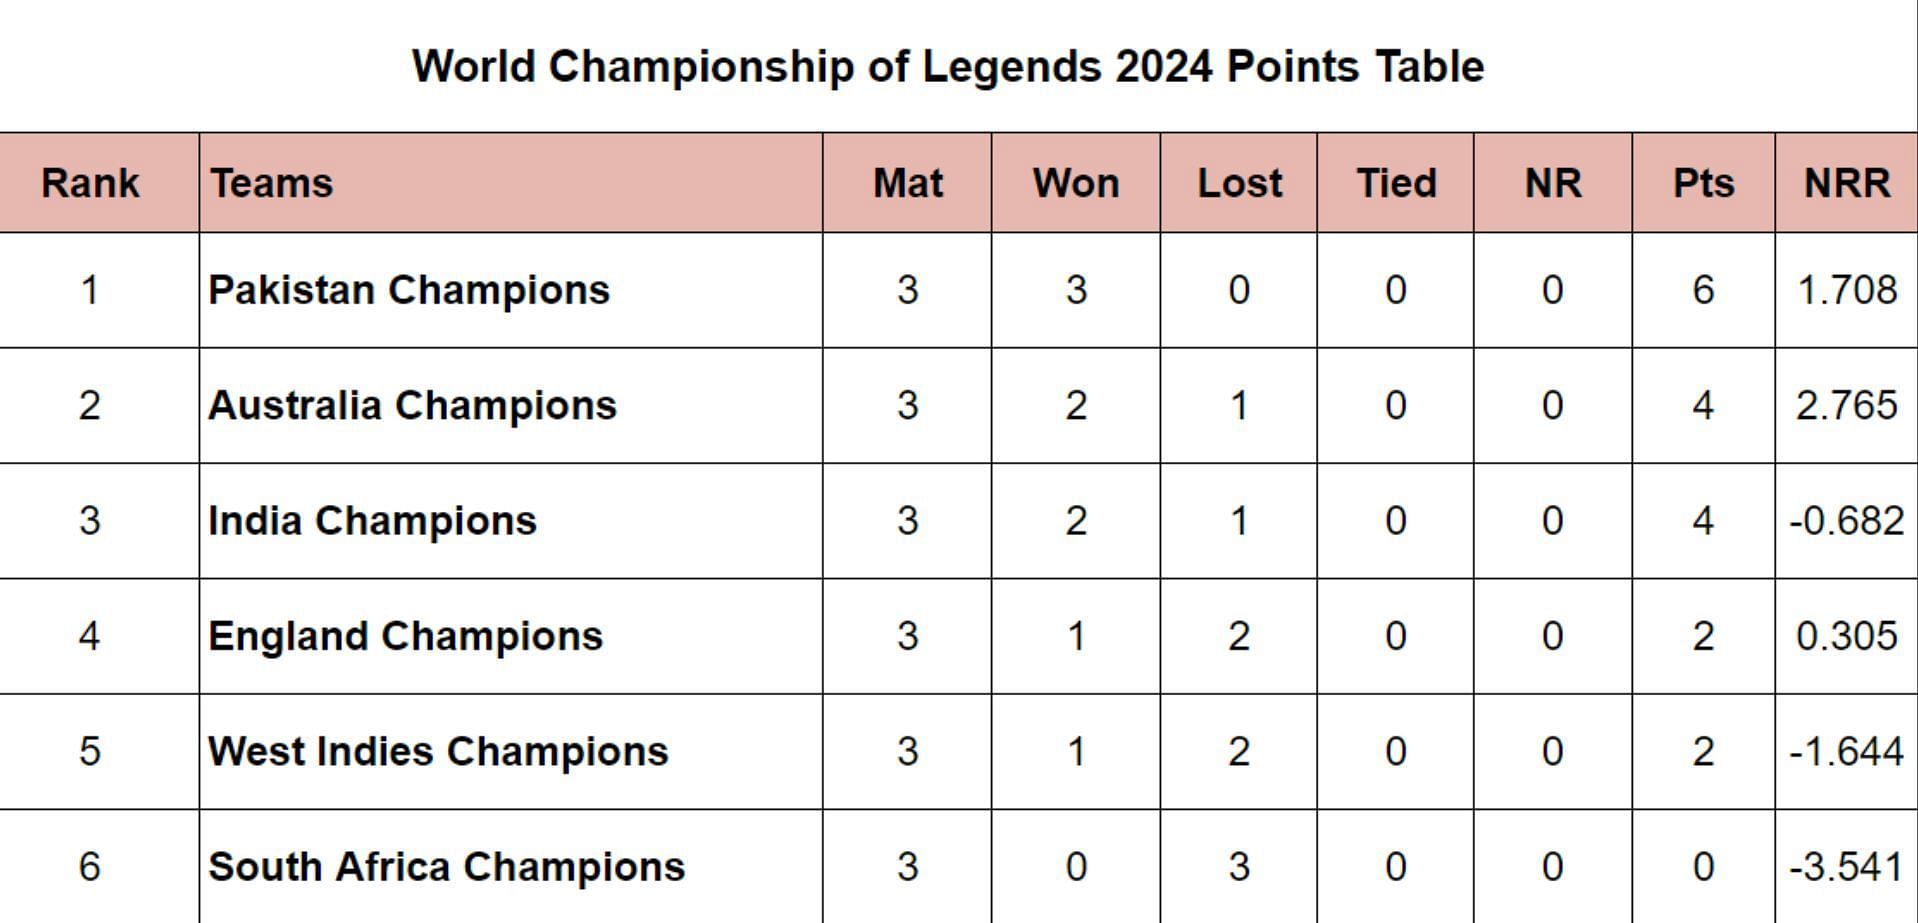 World Championship of Legends 2024 Points Table: Updated Standings after South Africa vs West Indies, Match 9